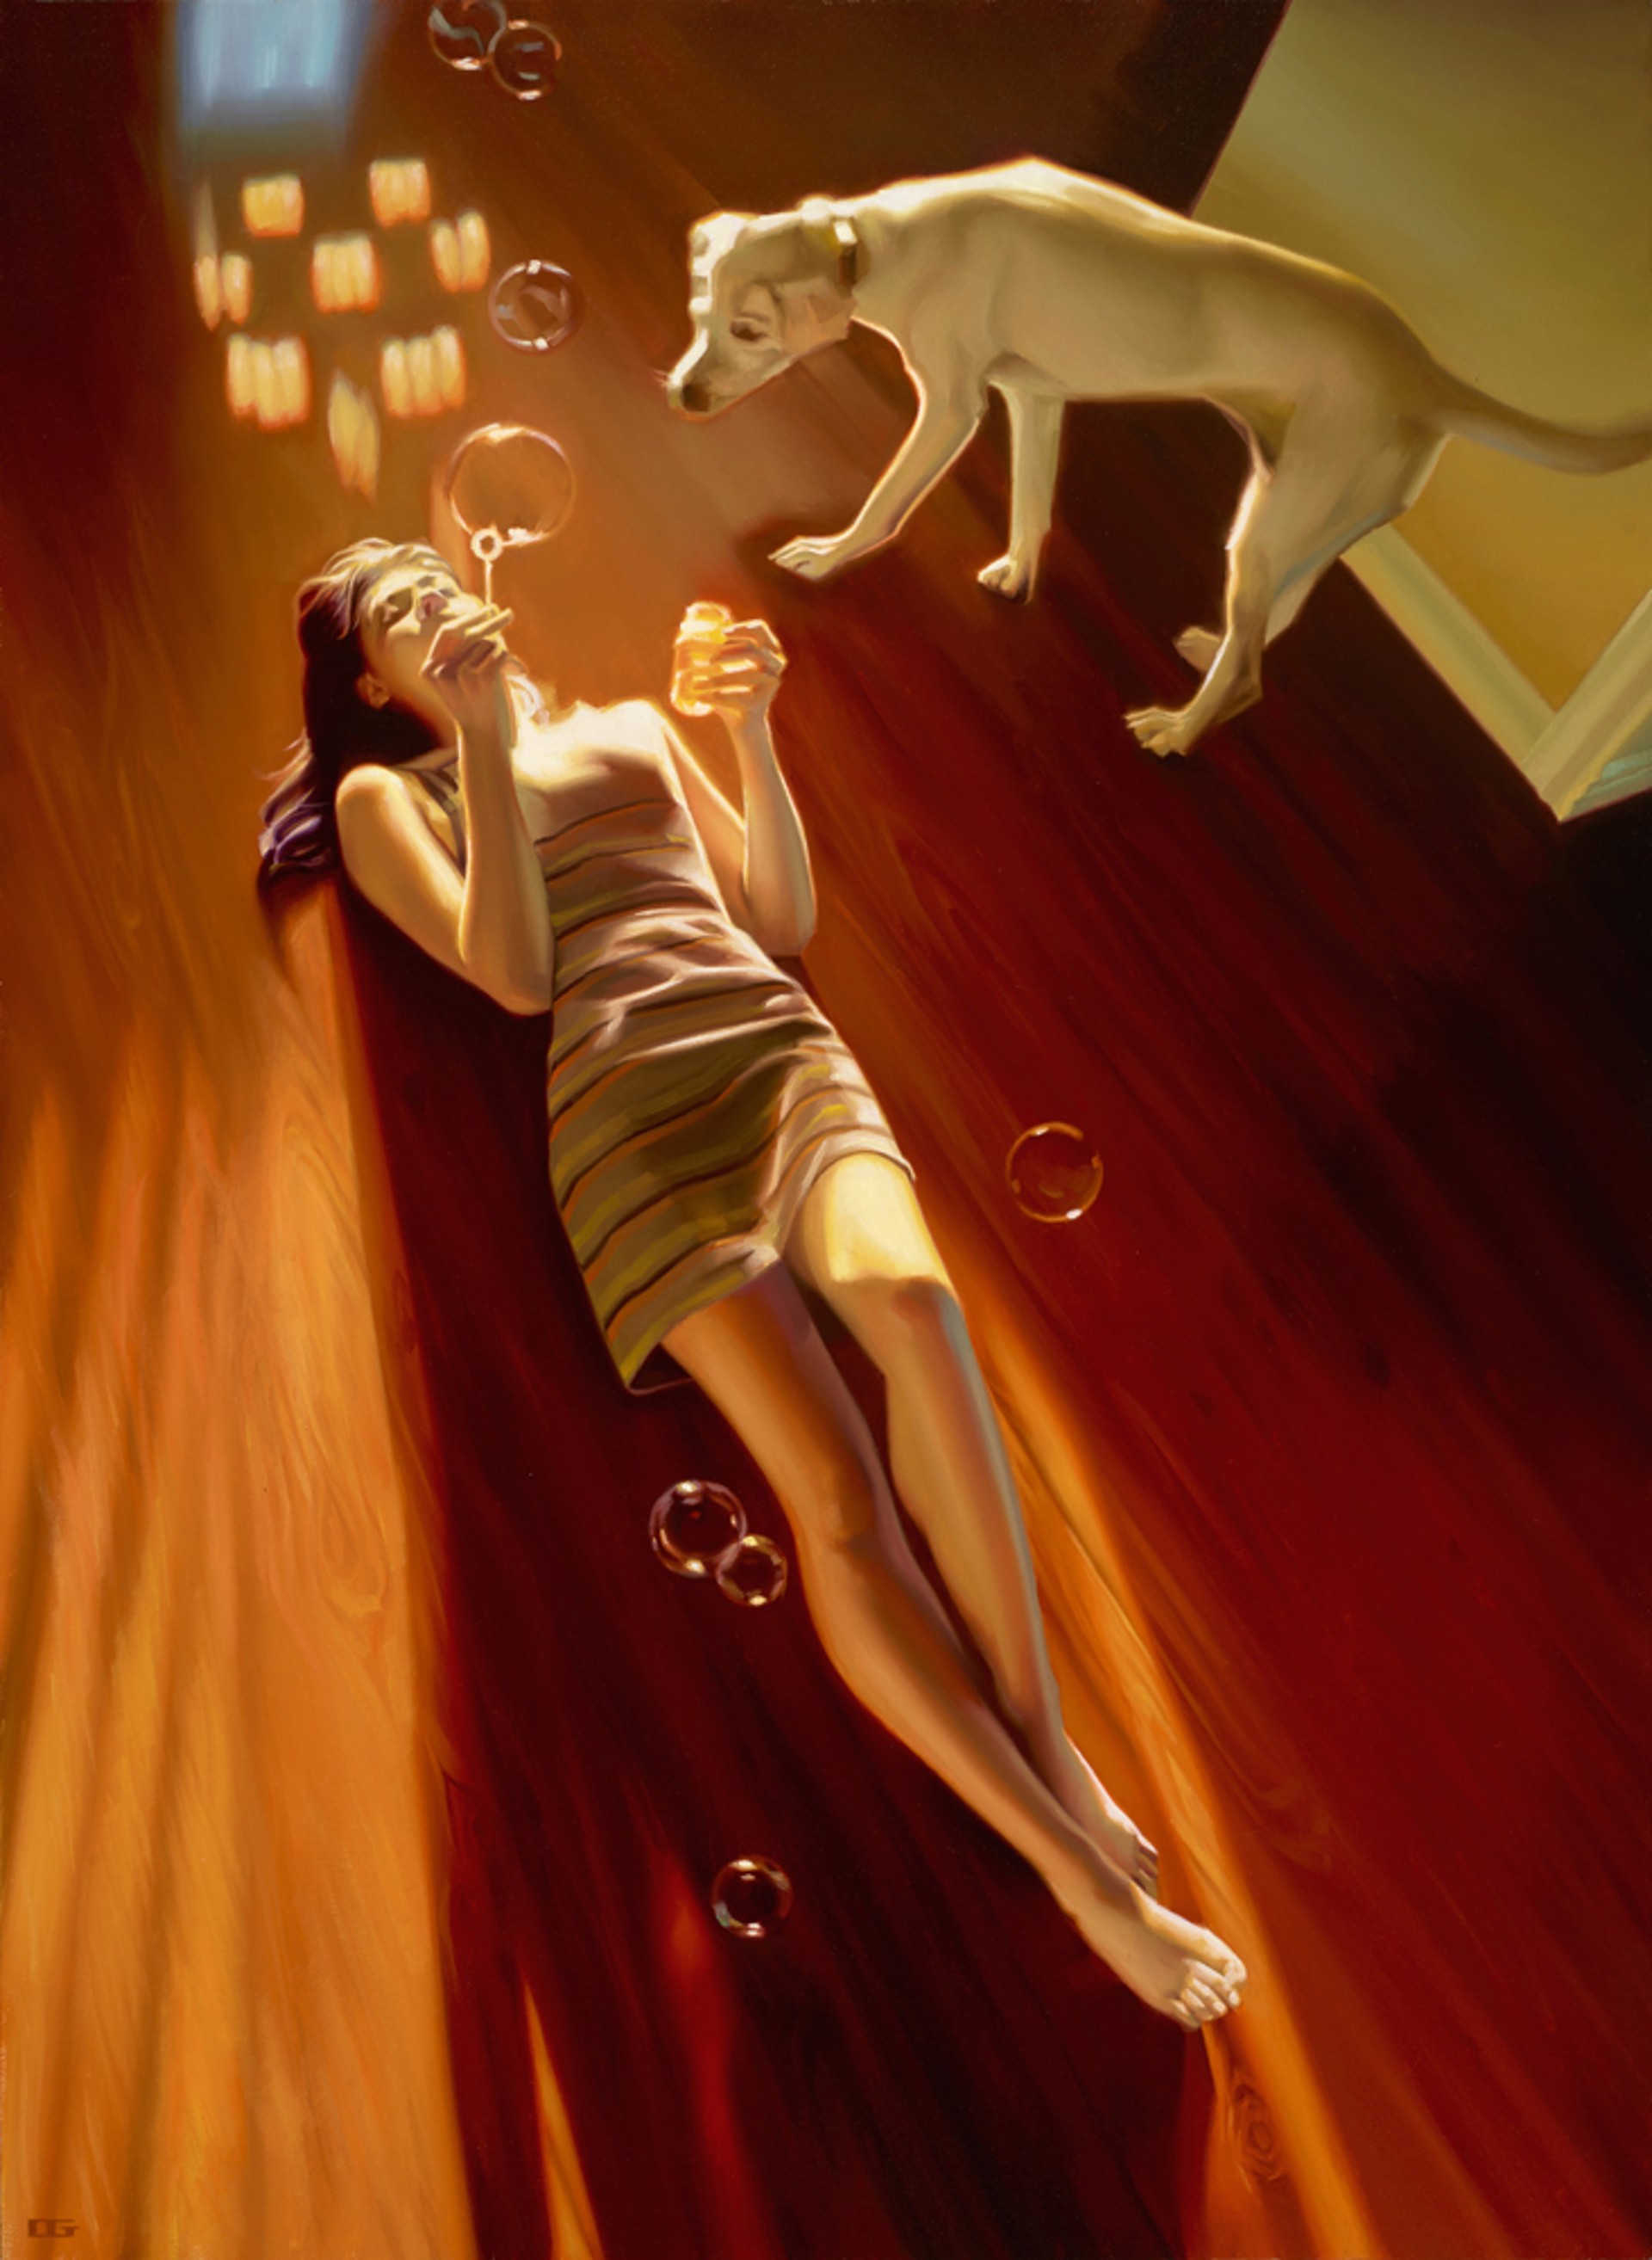 Little Worlds by Carrie Graber